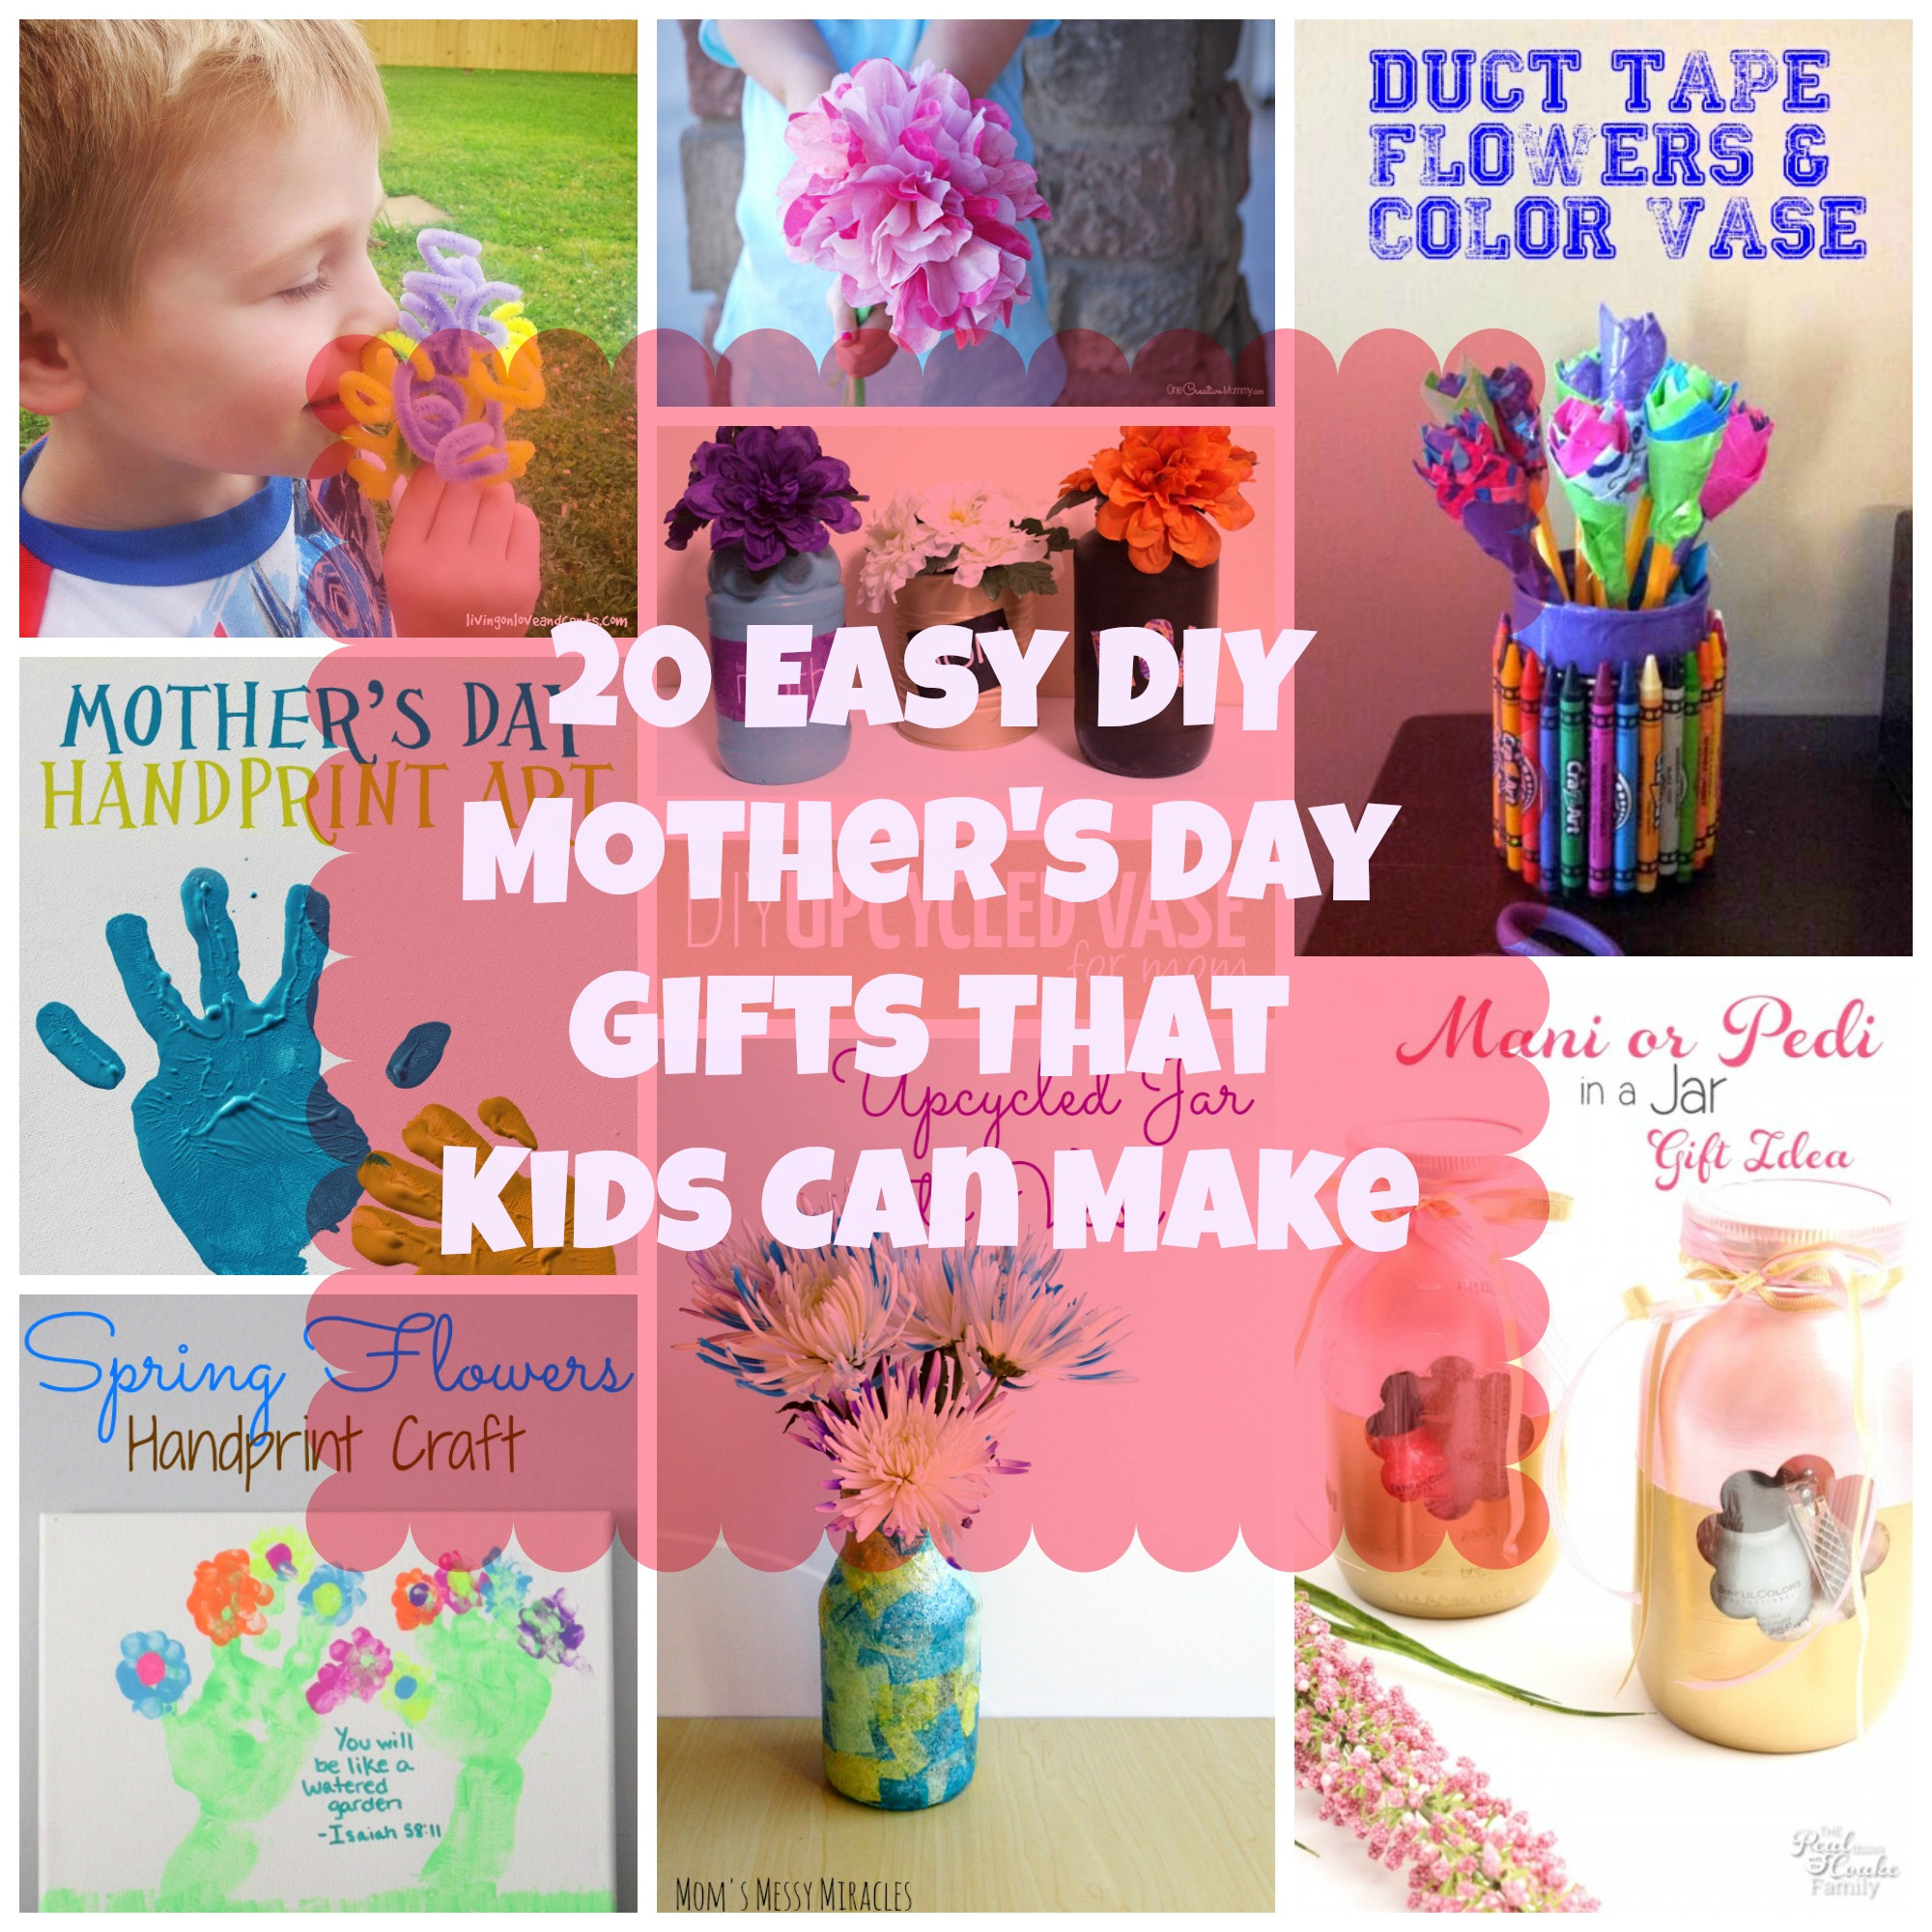 Easy DIY Mothers Day Gifts
 20 Easy DIY Mother s Day Gifts That Kids Can Make